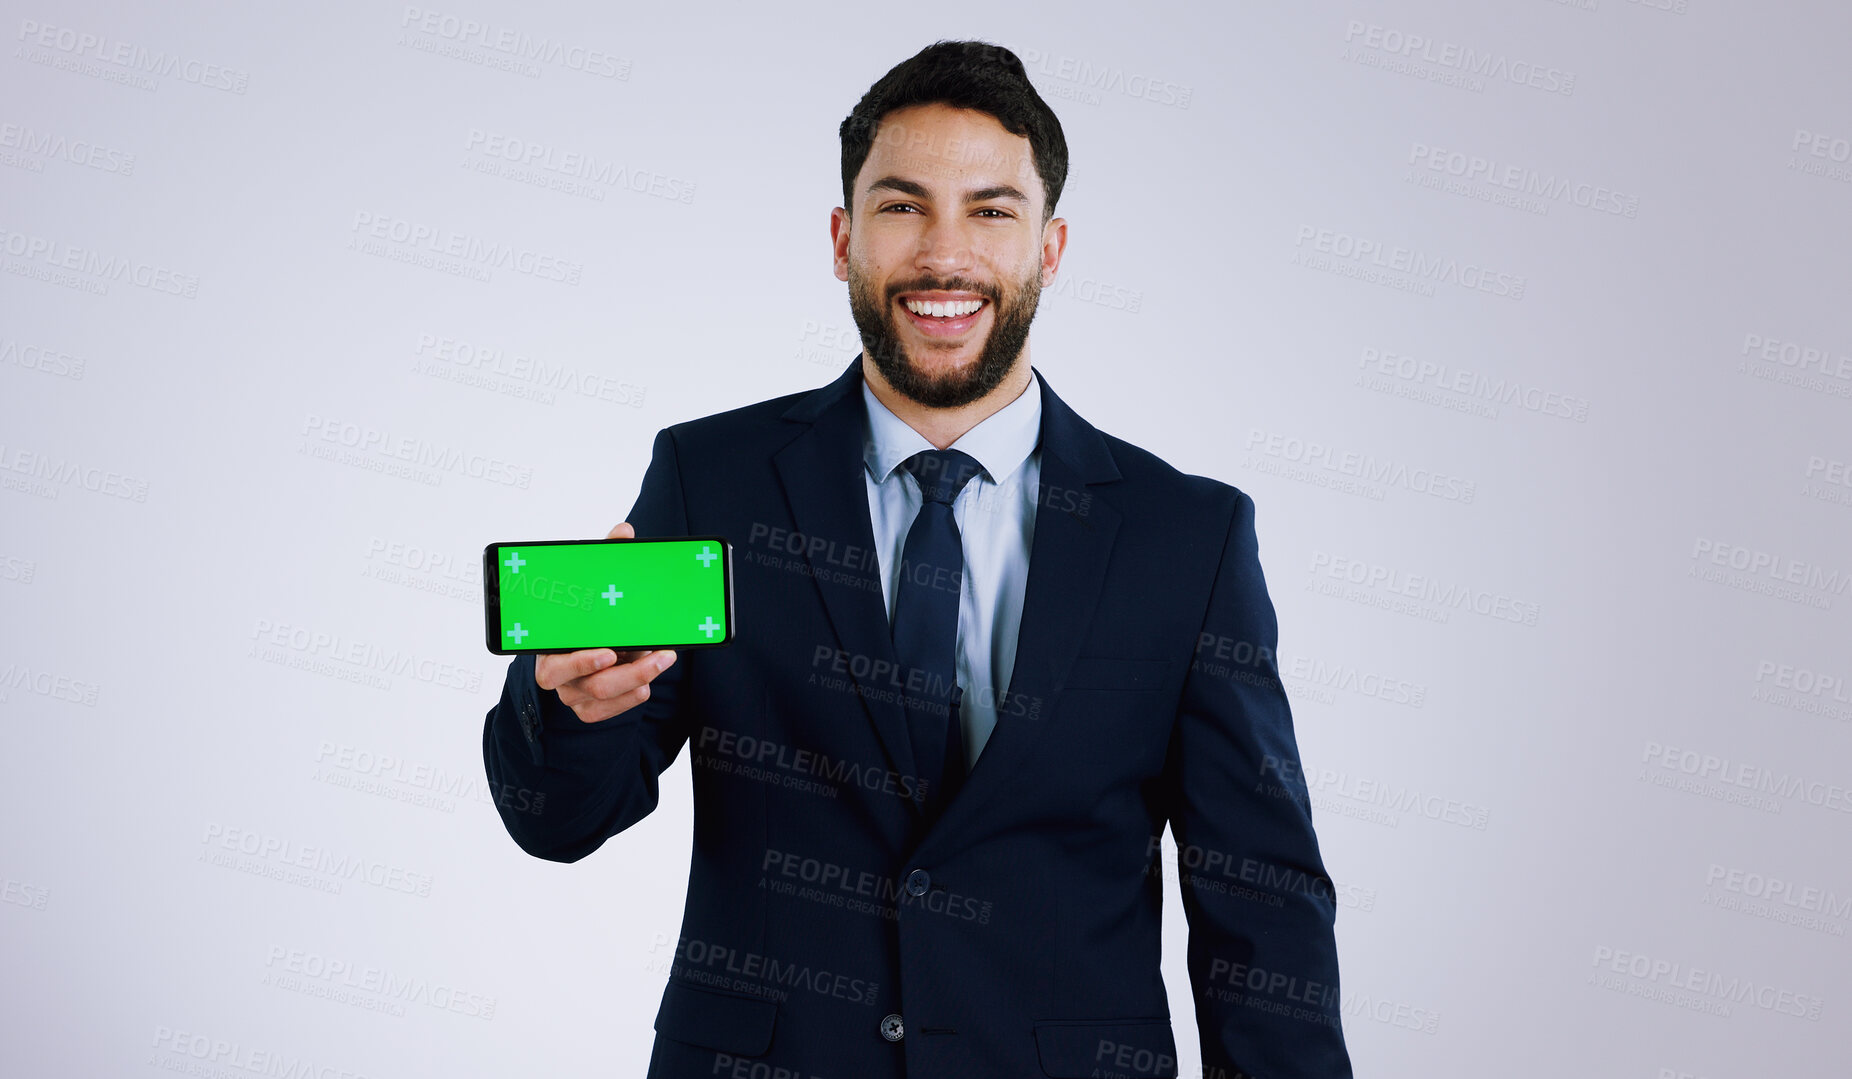 Buy stock photo Business man, phone green screen and presentation for stock market, trading software or registration in studio. Portrait of professional trader with mobile app or website mockup on a white background